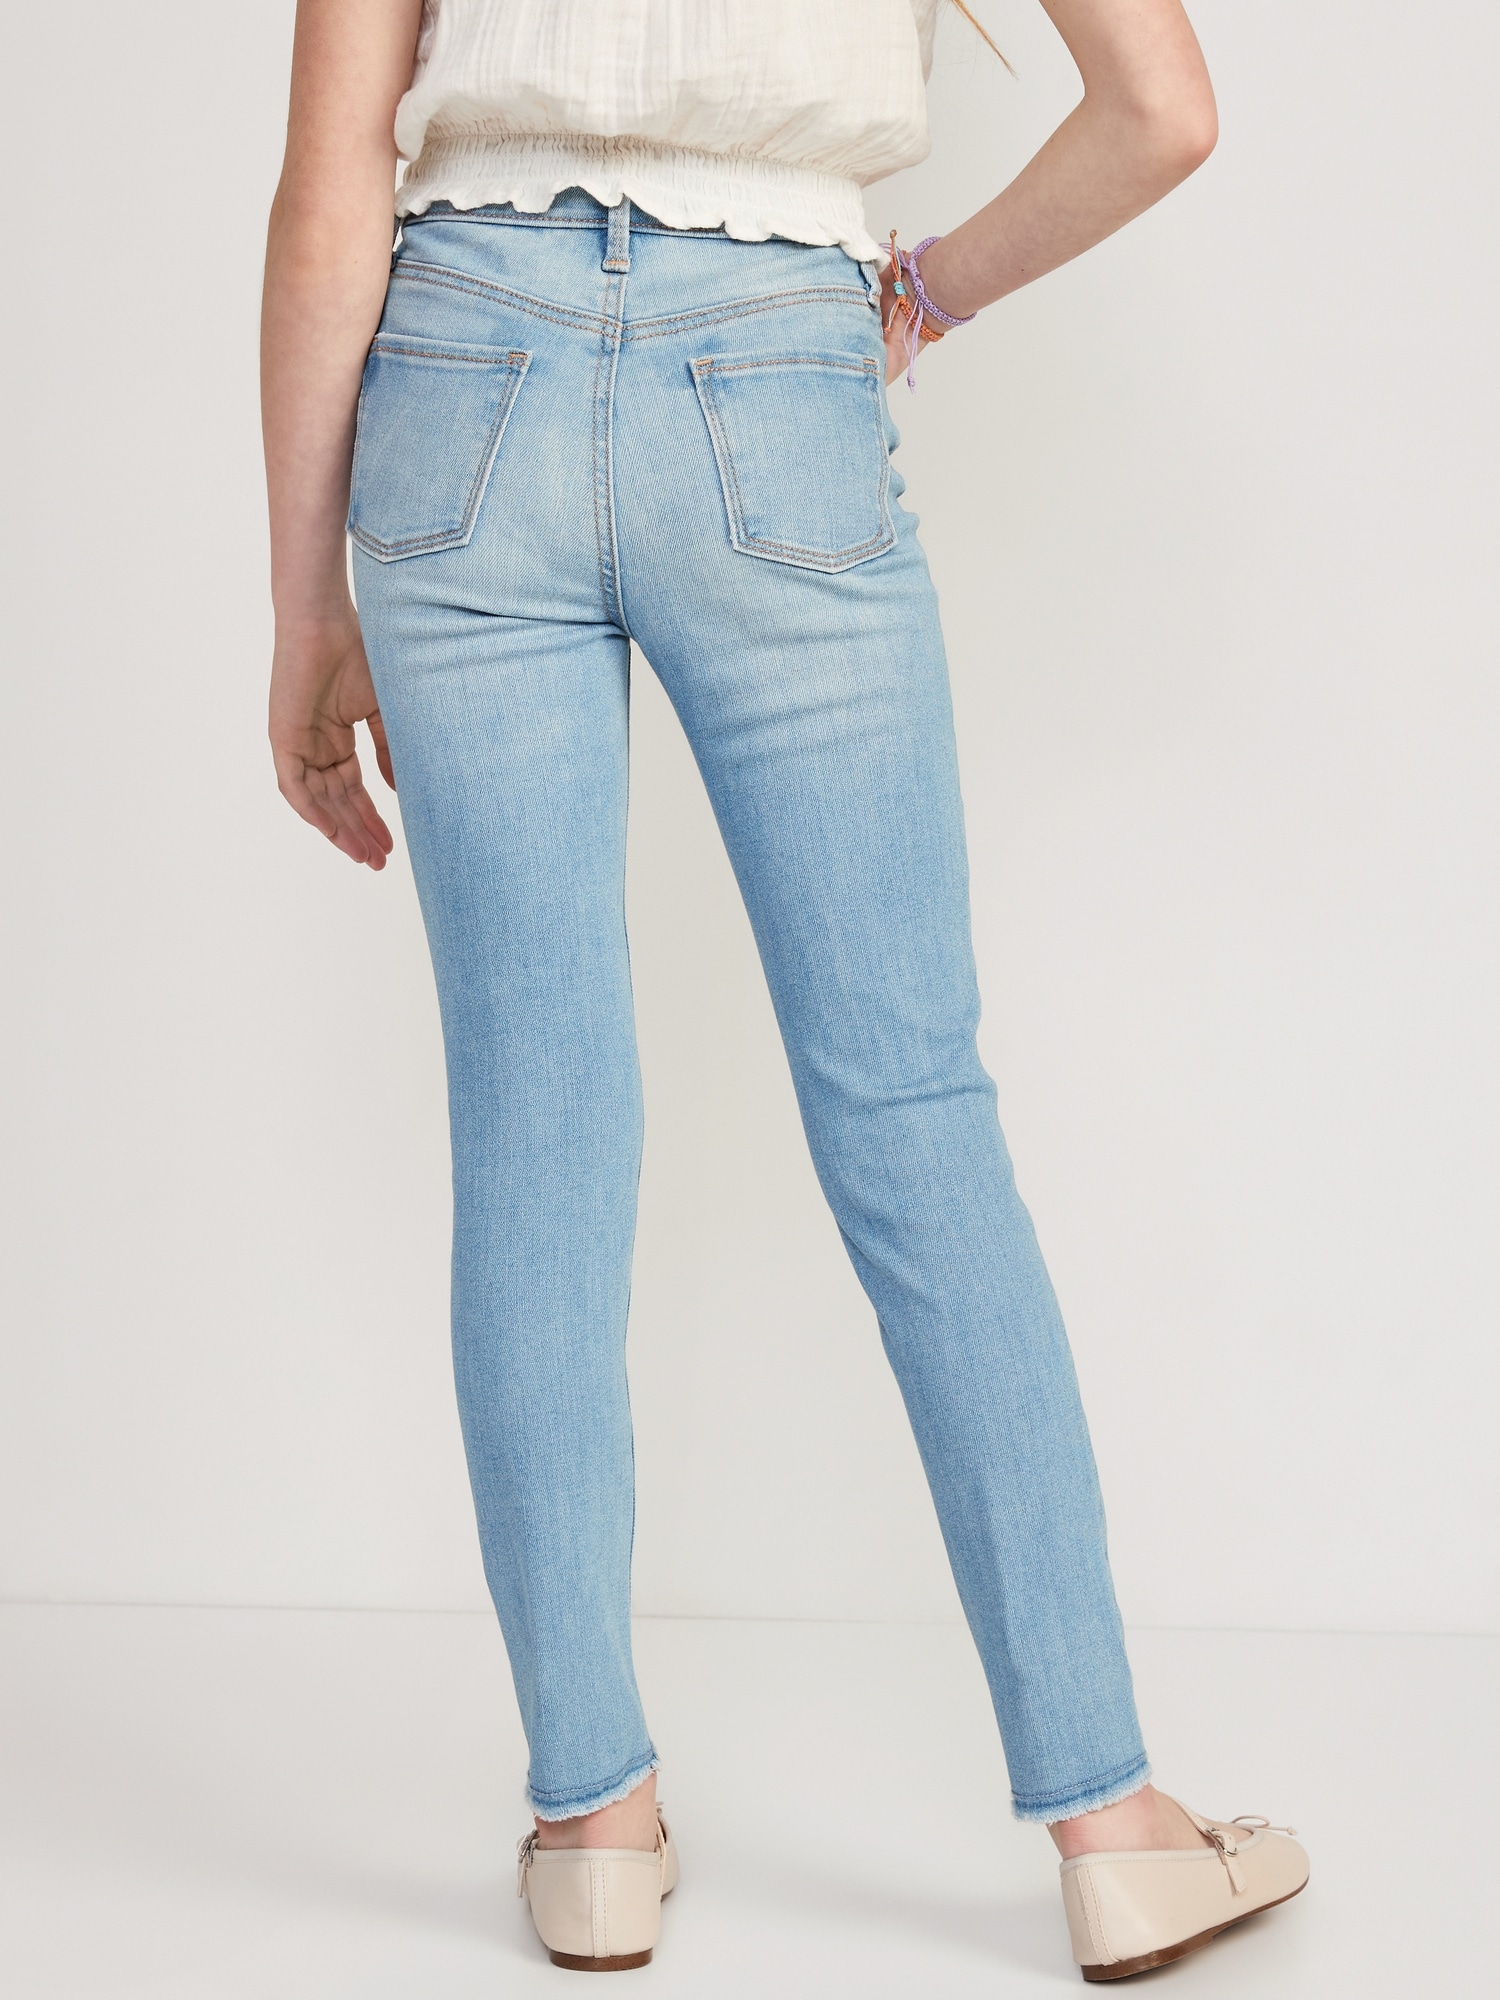 Old Navy - High-Waisted Built-In Tough Rockstar Super Skinny